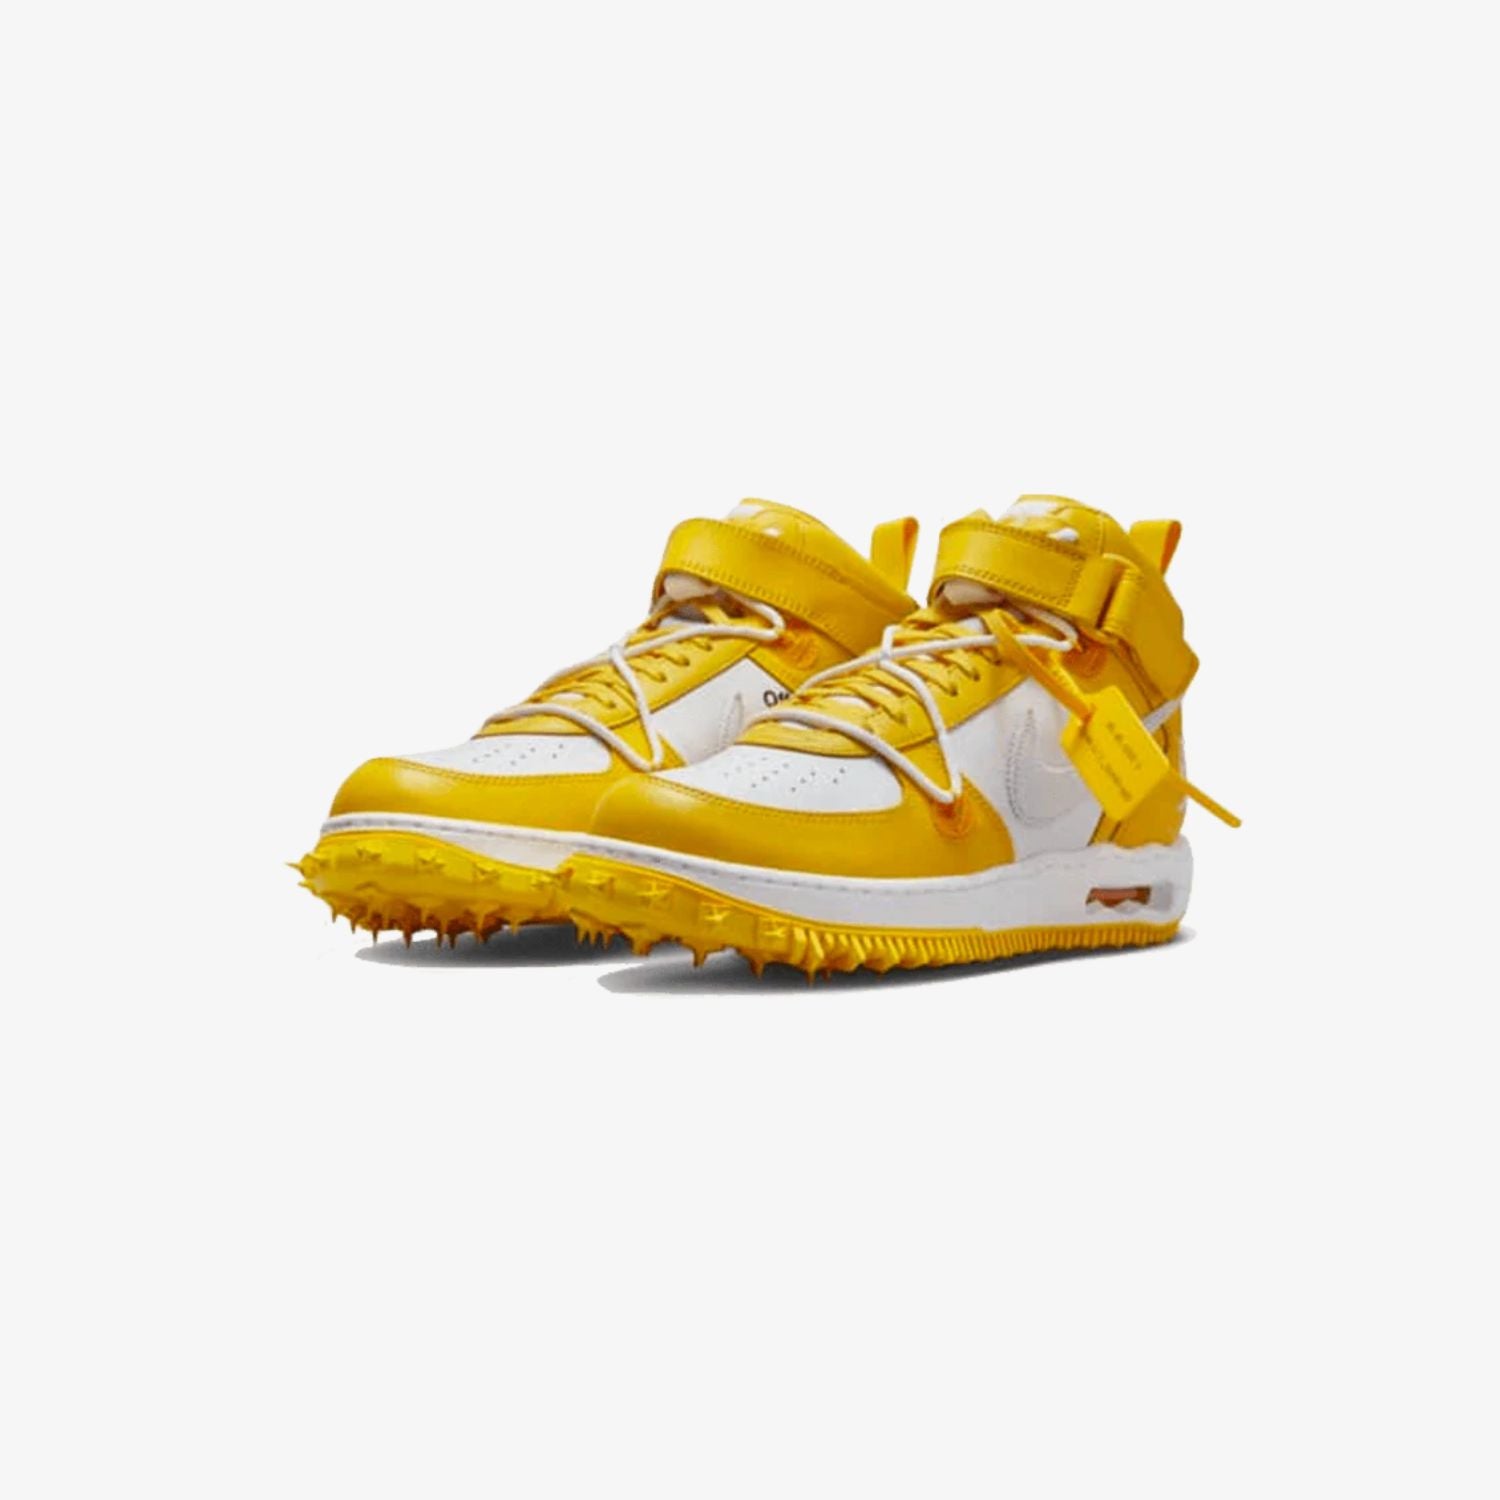 off-white-nike-air-force-1-varsity-maize-DR0500-101-unfazed-2_1